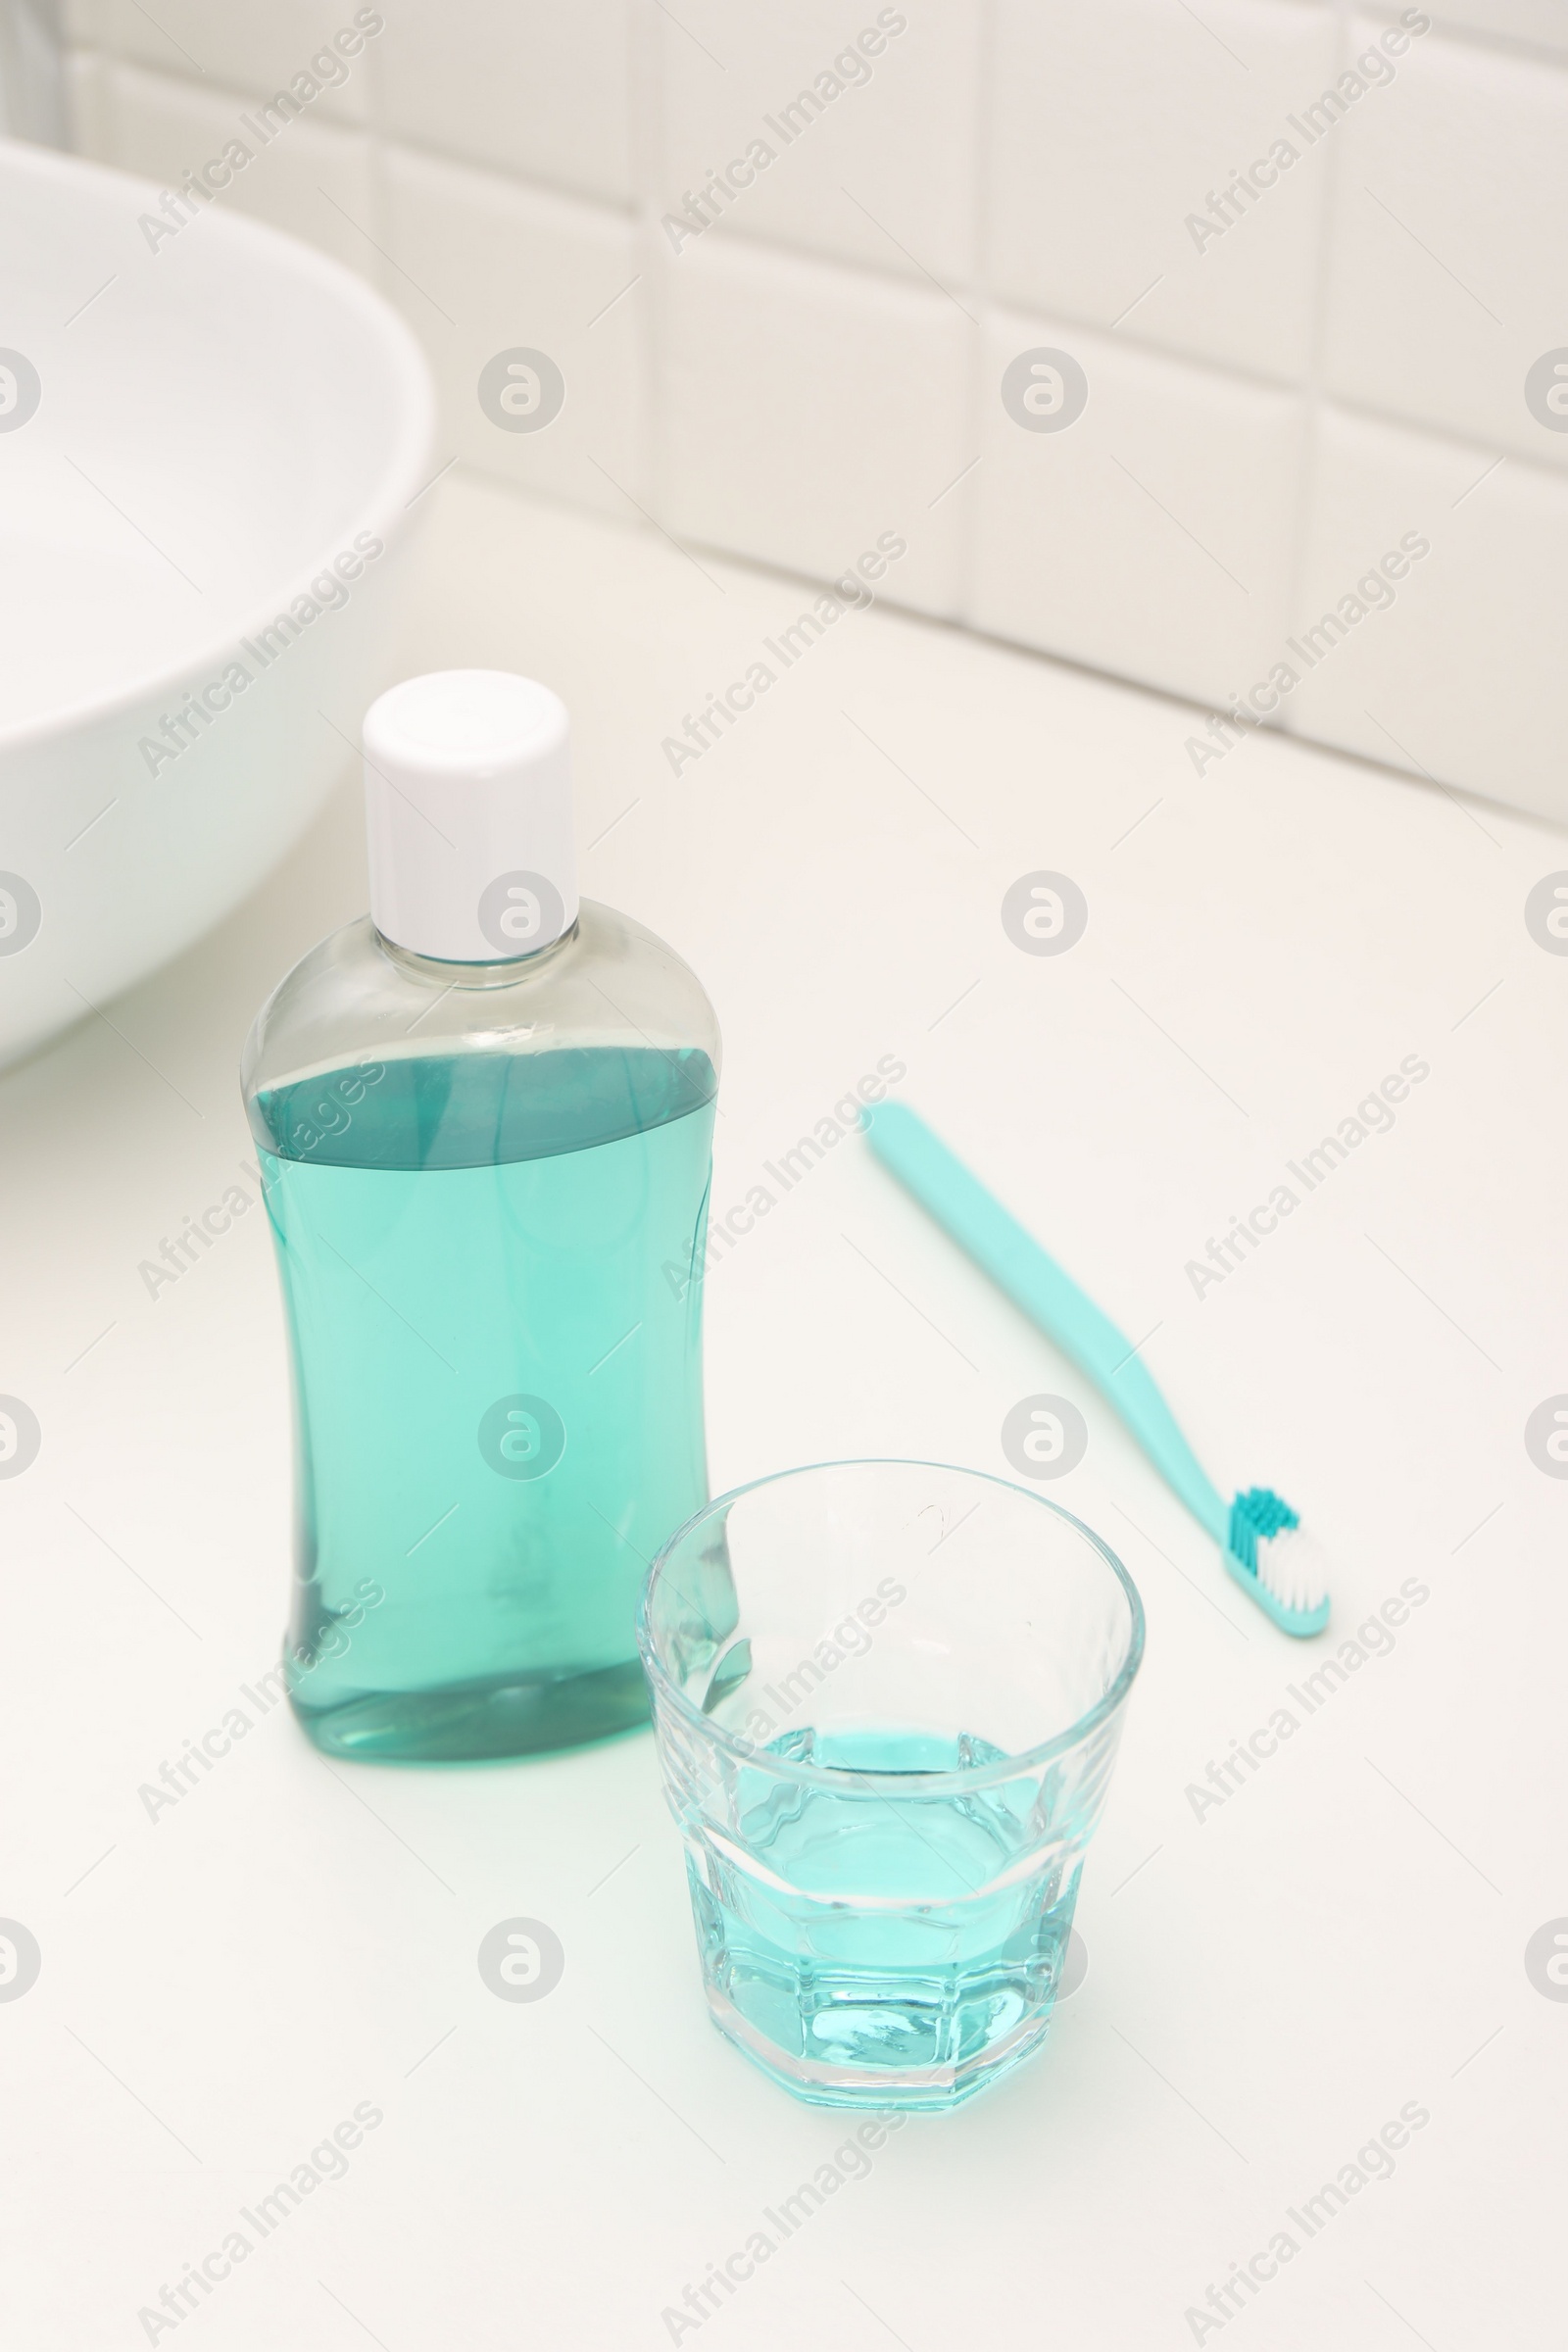 Photo of Bottle of mouthwash, toothbrush and glass on white table in bathroom